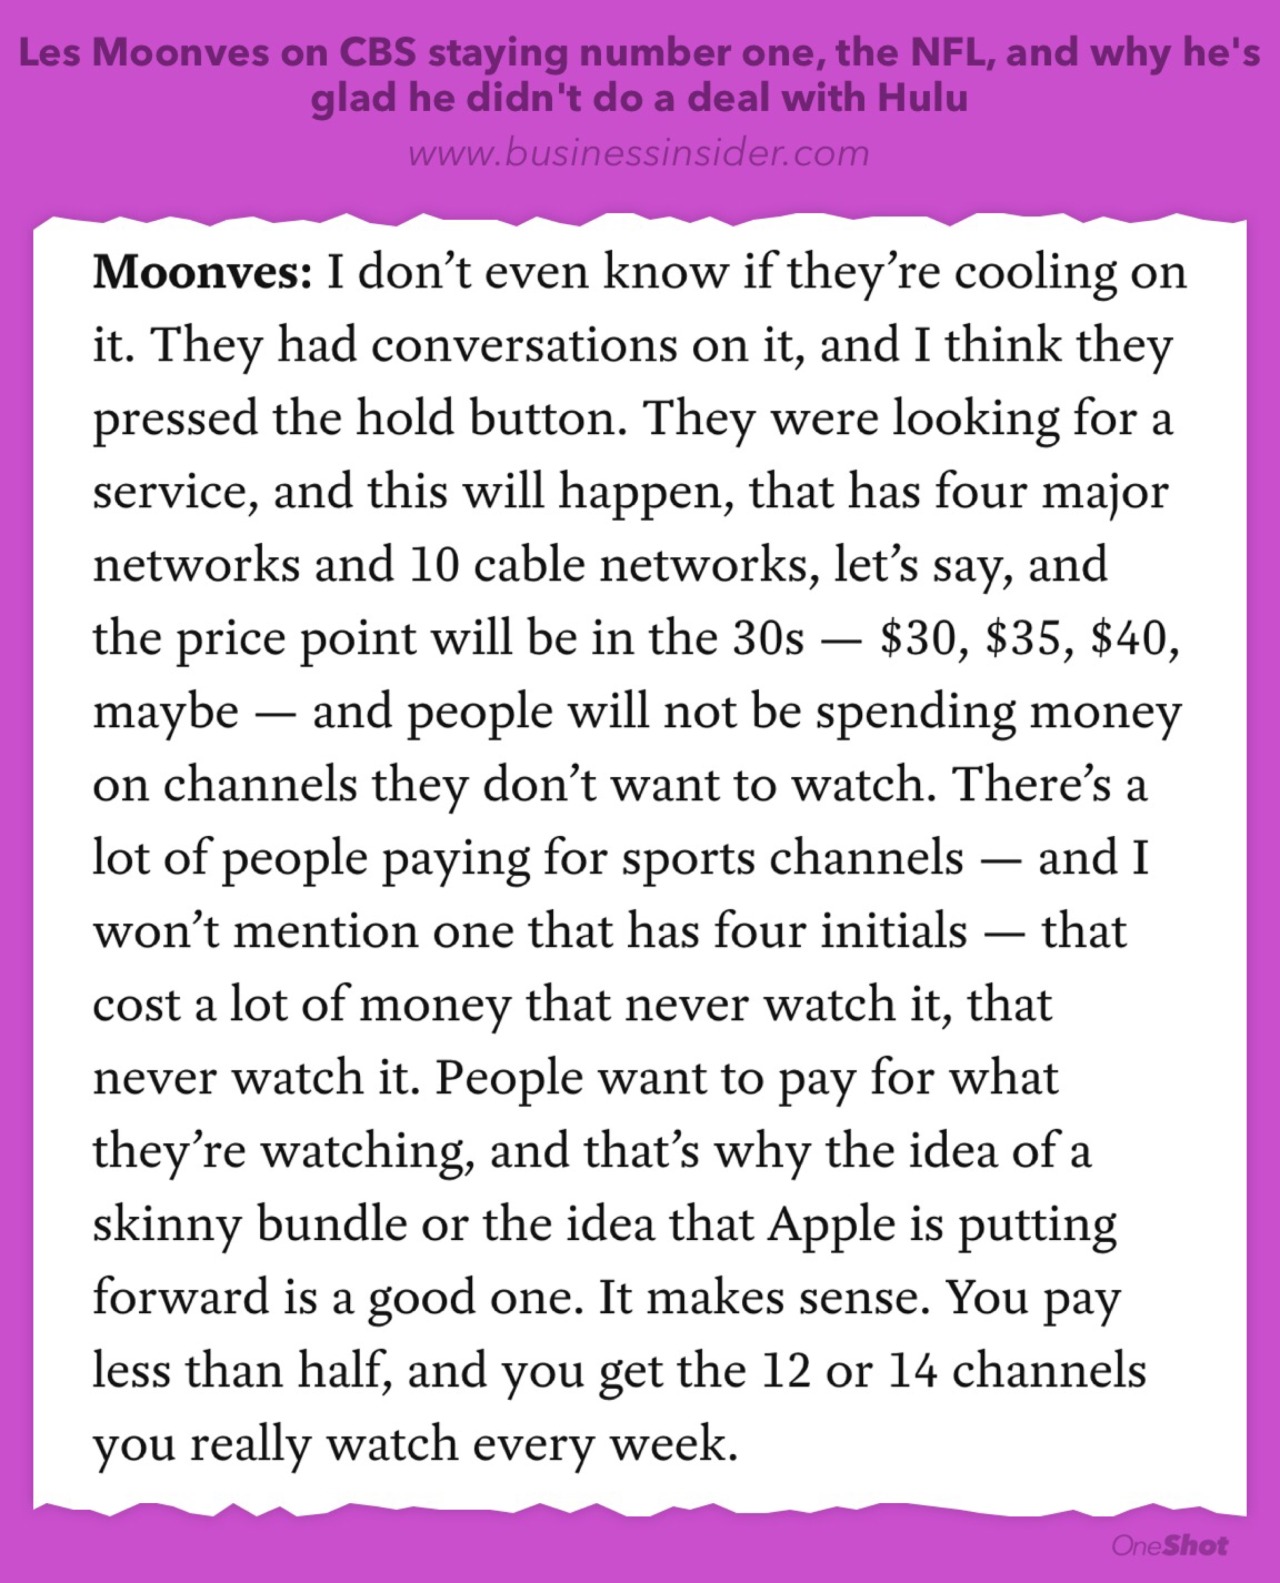 Les Moonves, when asked about Apple’s television service aspirations.